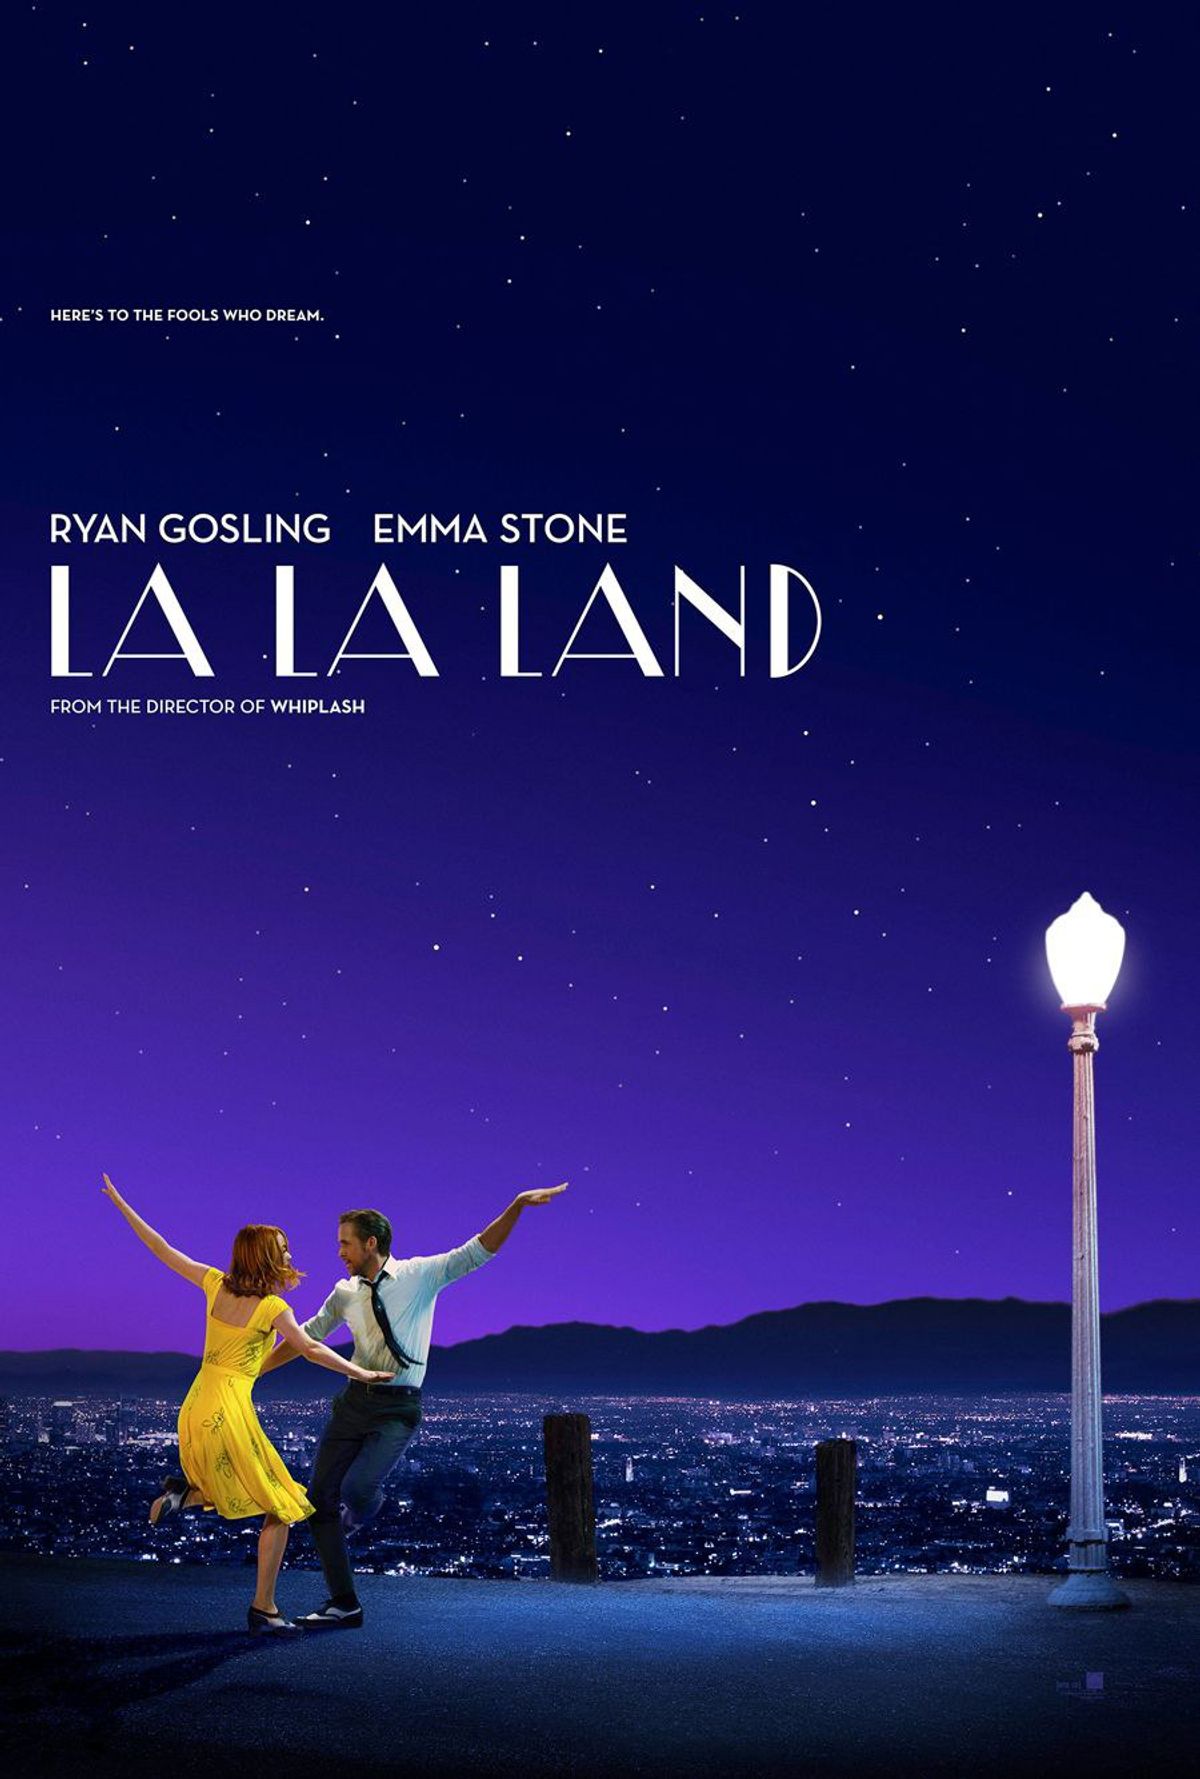 Why You Should See "La La Land" If You Haven't Already